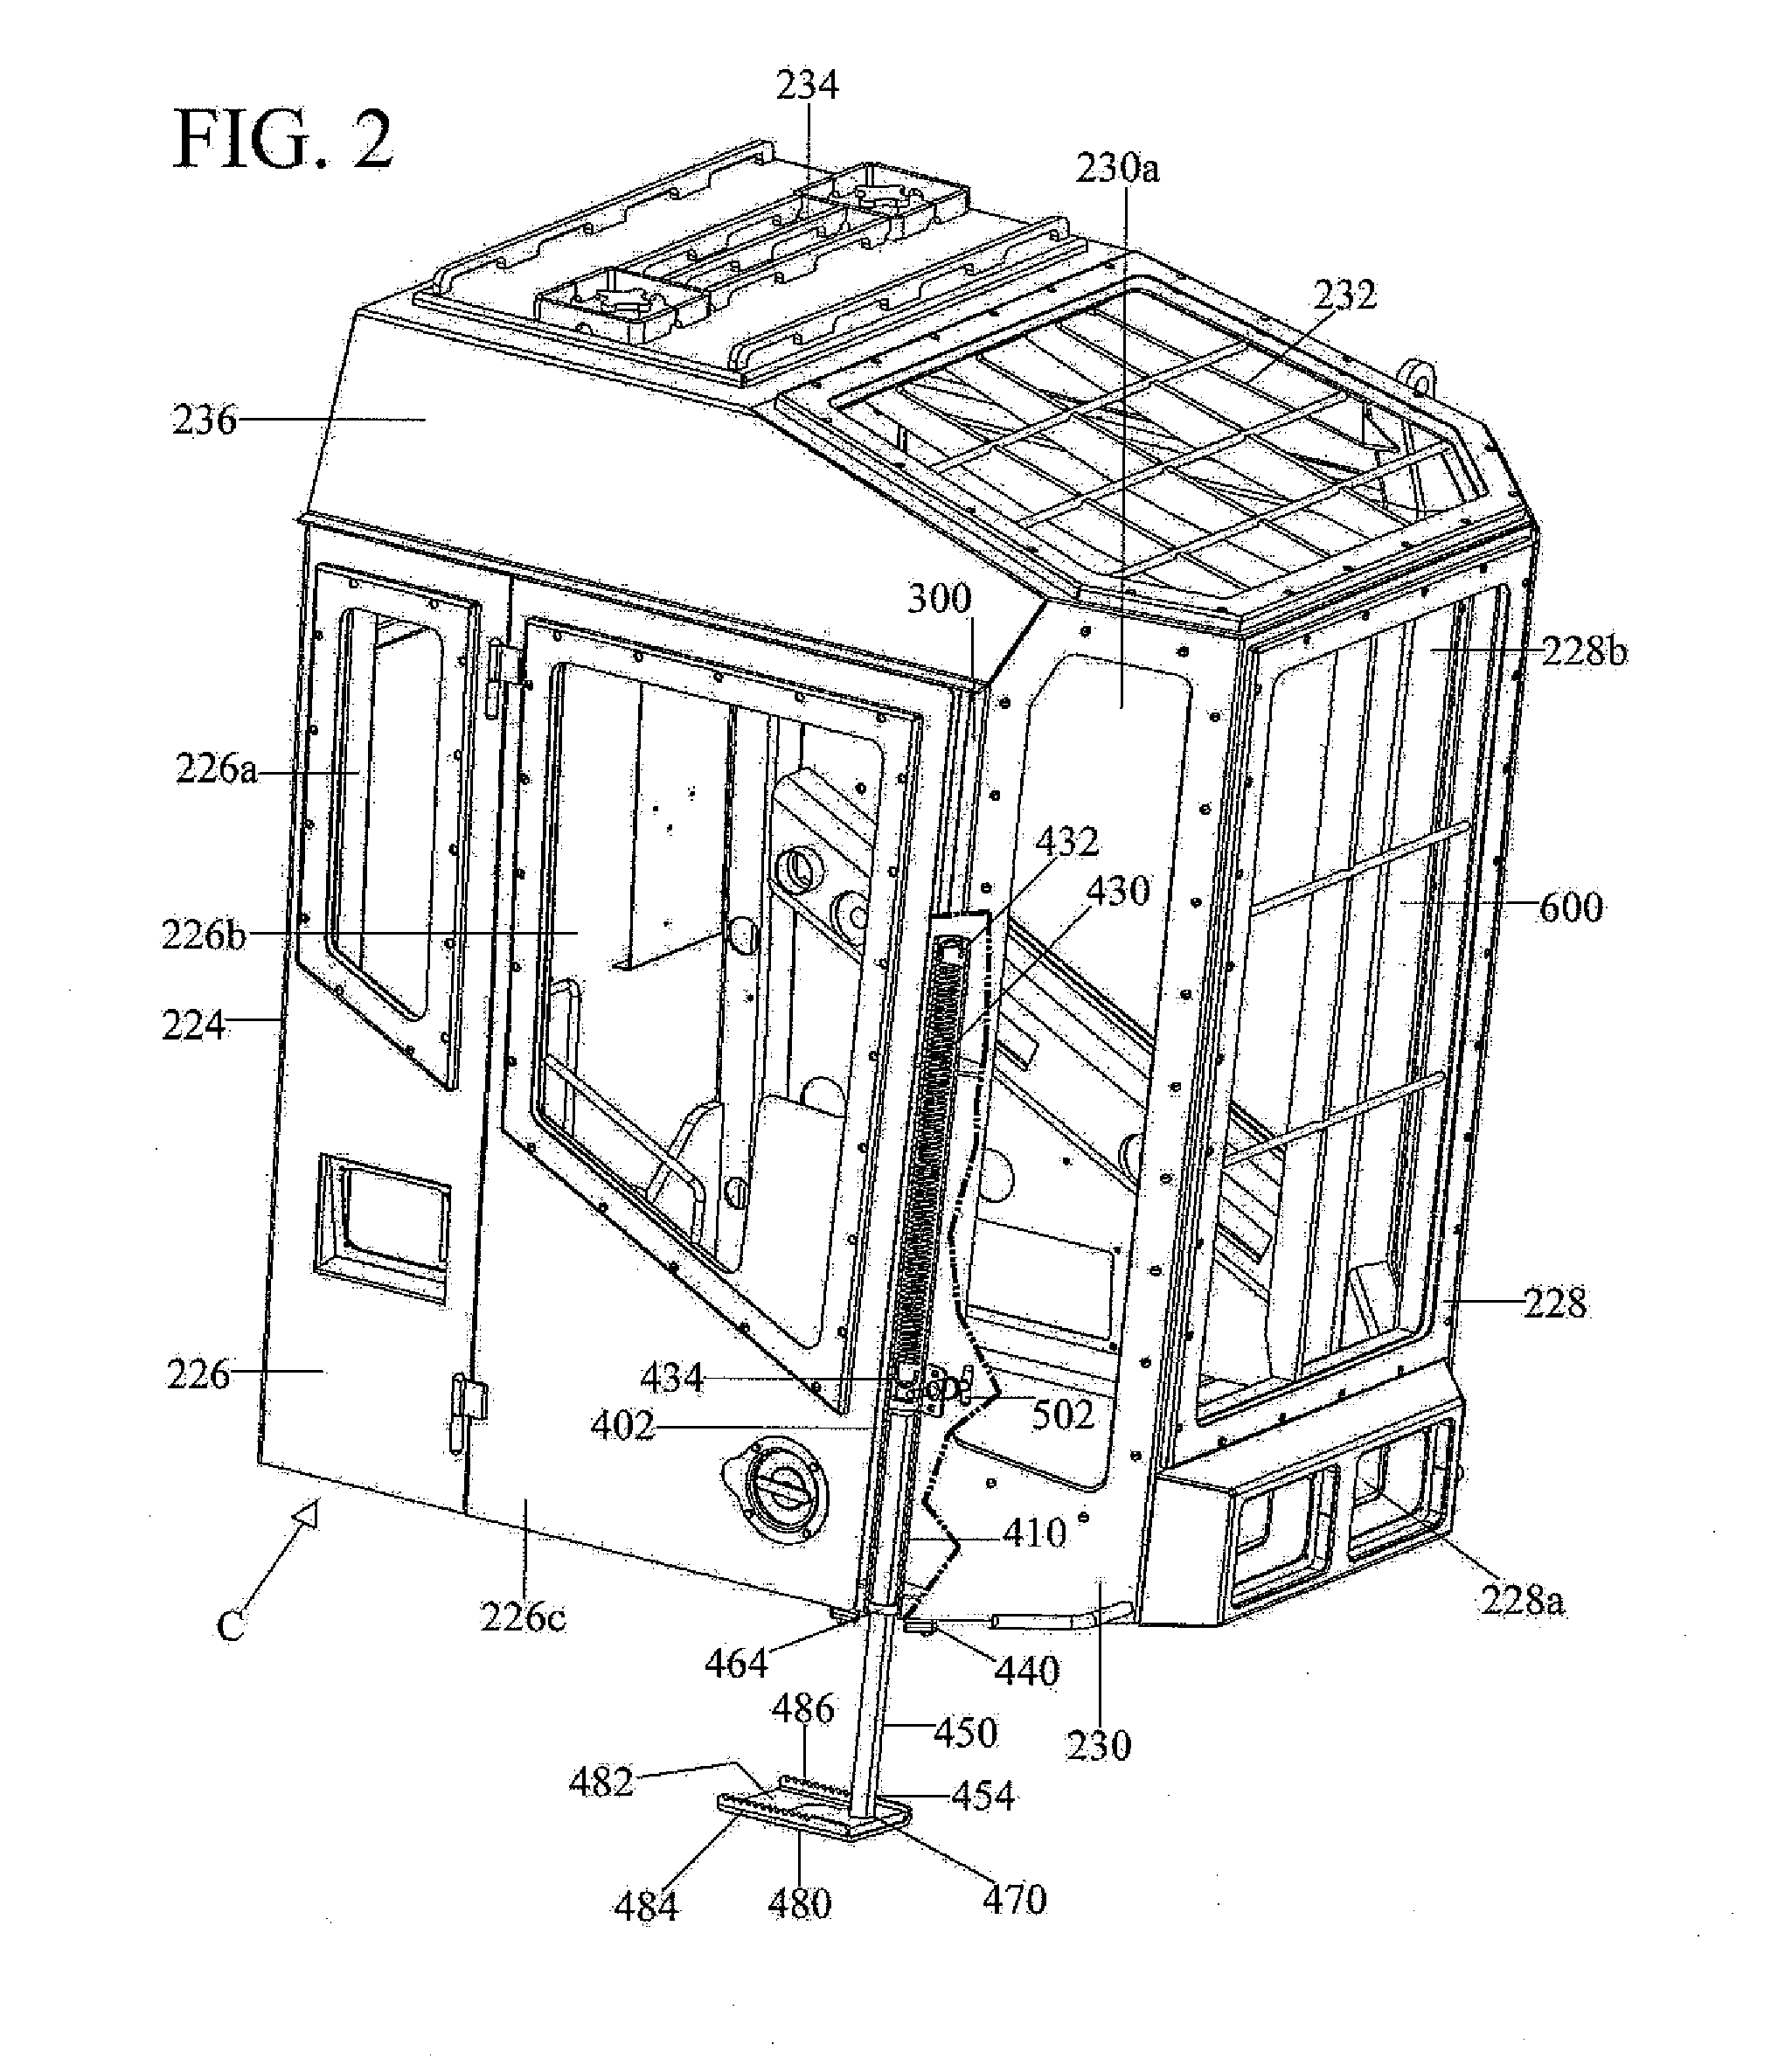 Retractable Step for Cab of Mobile Machine